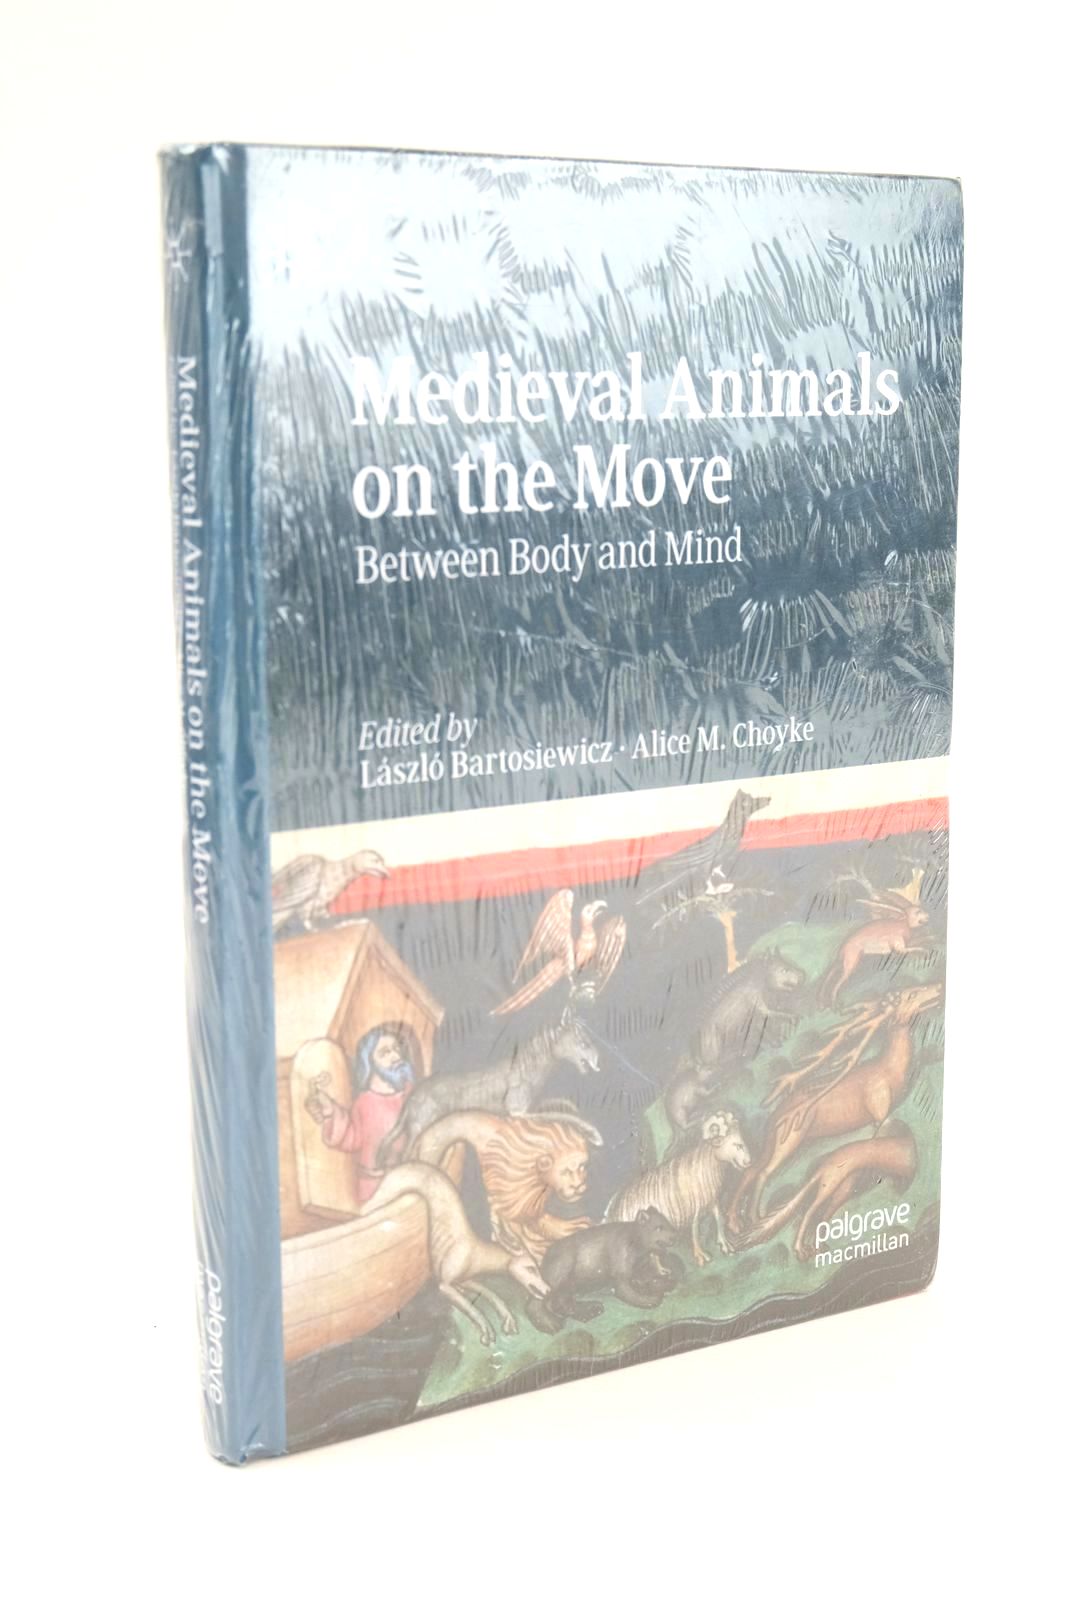 Photo of MEDIEVAL ANIMALS ON THE MOVE BETWEEN BODY AND MIND written by Bartosiewicz, Laszlo Choyke, Alice M. published by Palgrave Macmillan (STOCK CODE: 1324955)  for sale by Stella & Rose's Books